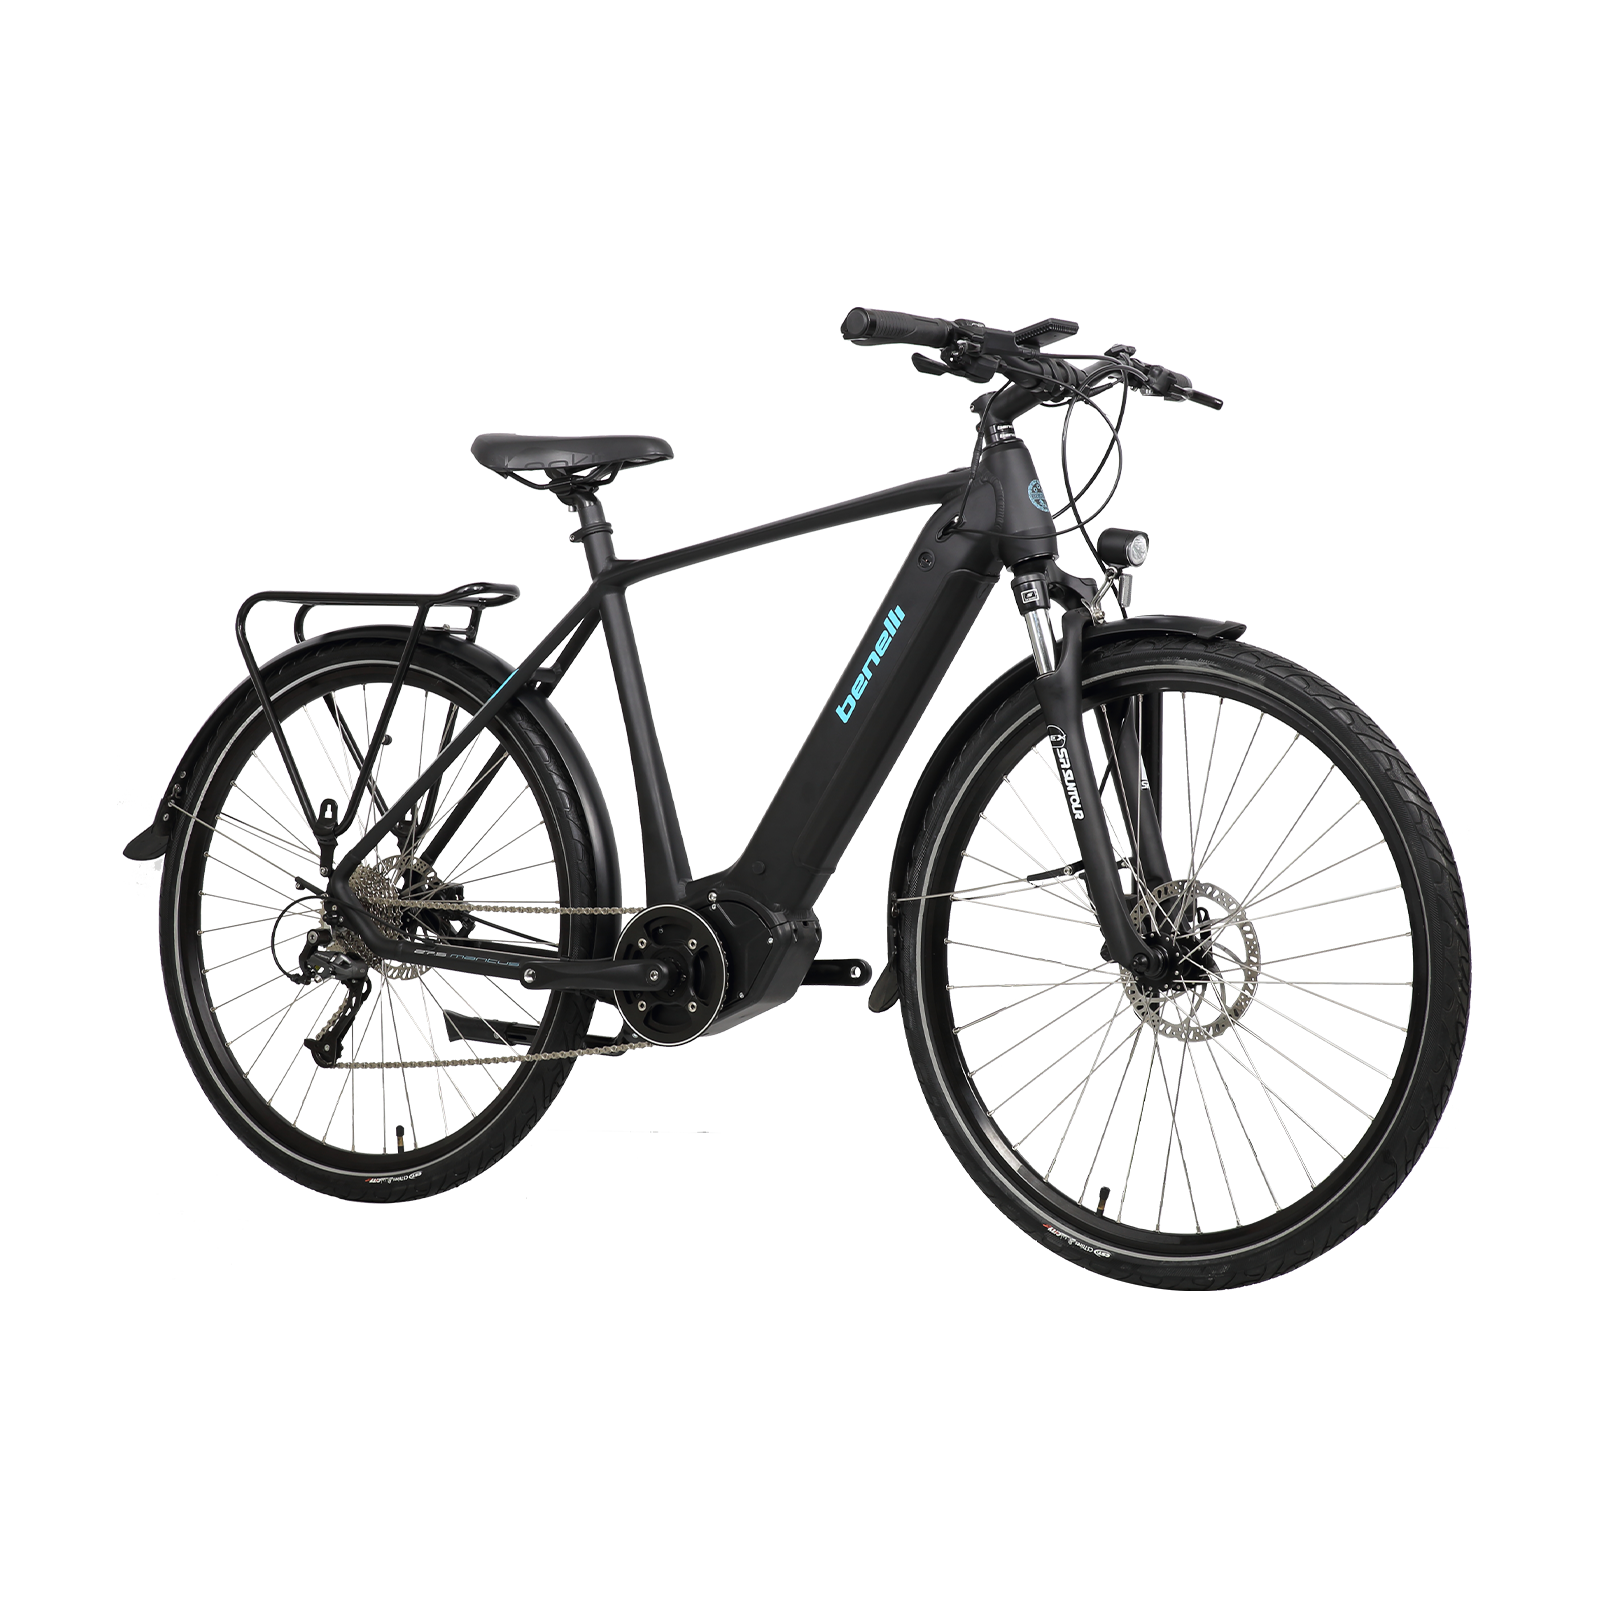 Refurbished Benelli eBike Bravo (Only available sydney area, self pick up only)